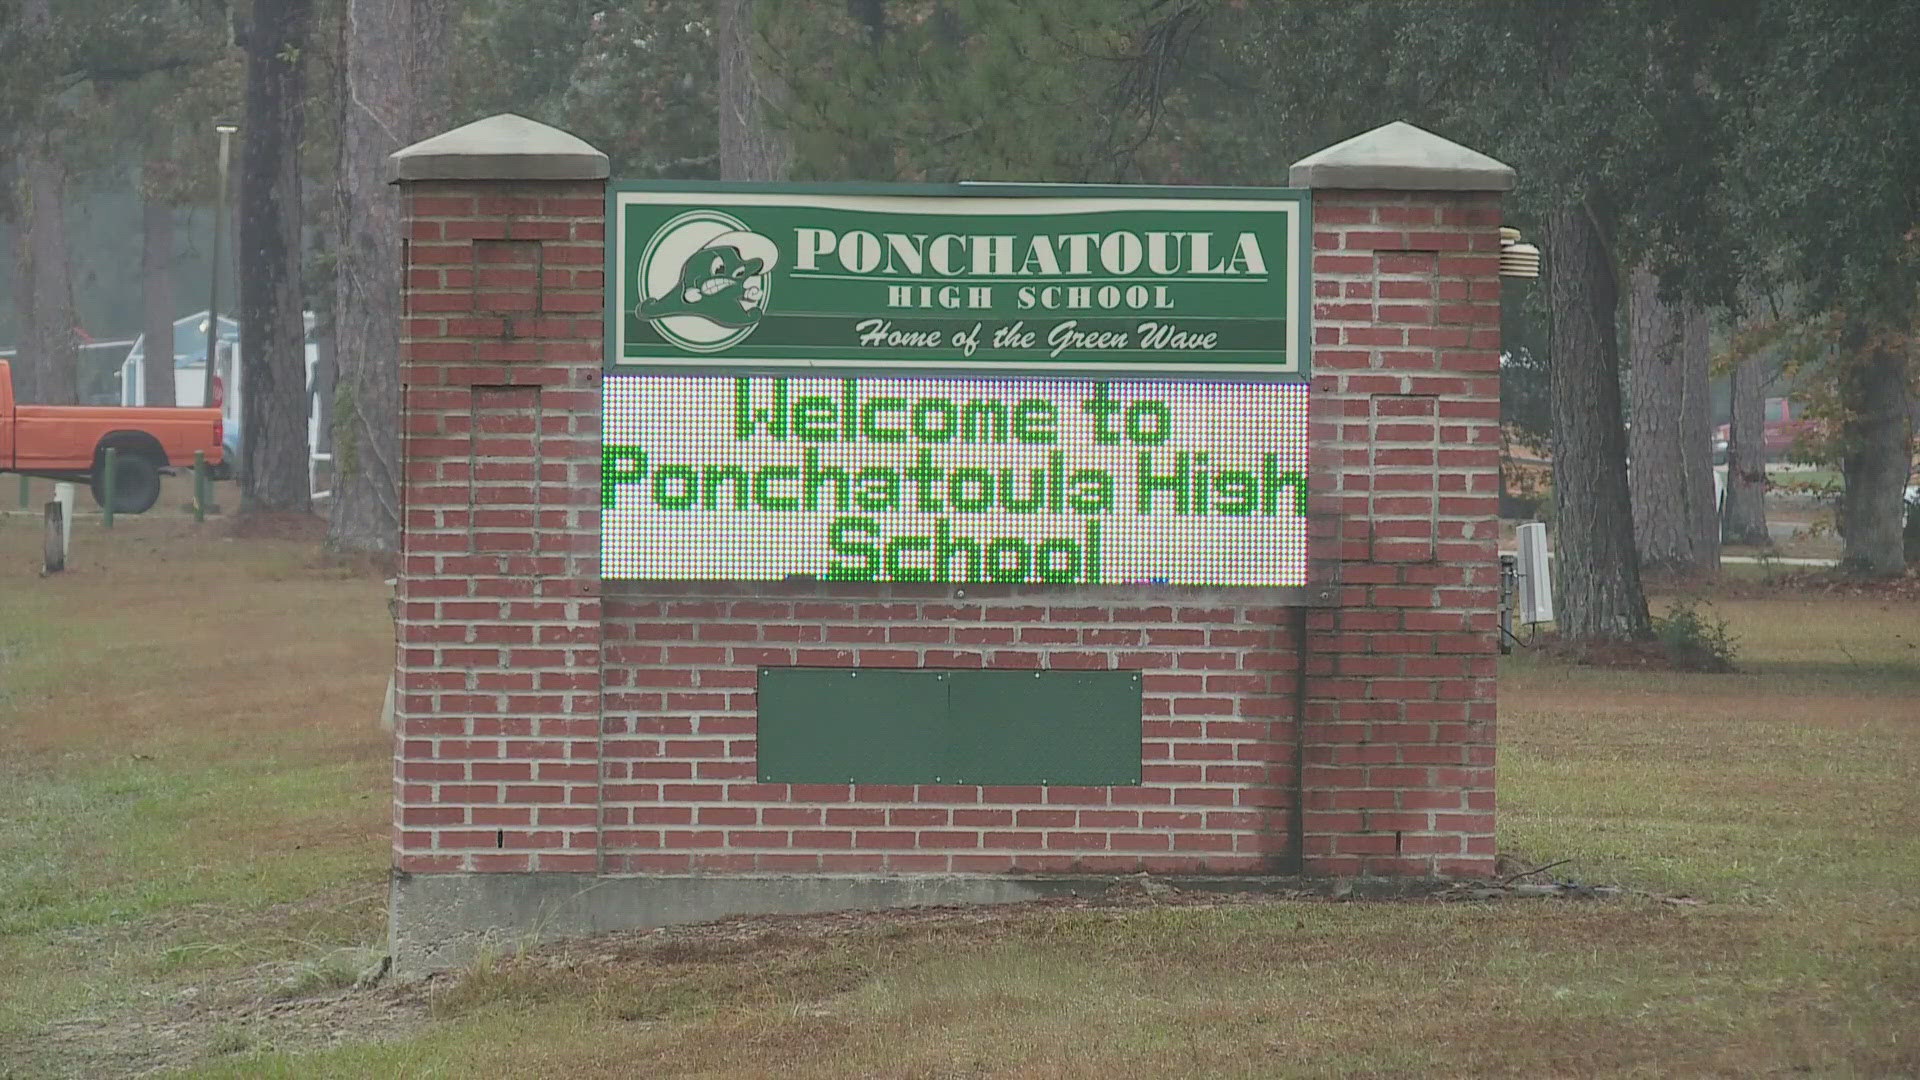 The Tangipahoa Parish Sheriff's Office responded to three separate altercations at Ponchatoula High School prior to 9 a.m. on Tuesday morning.